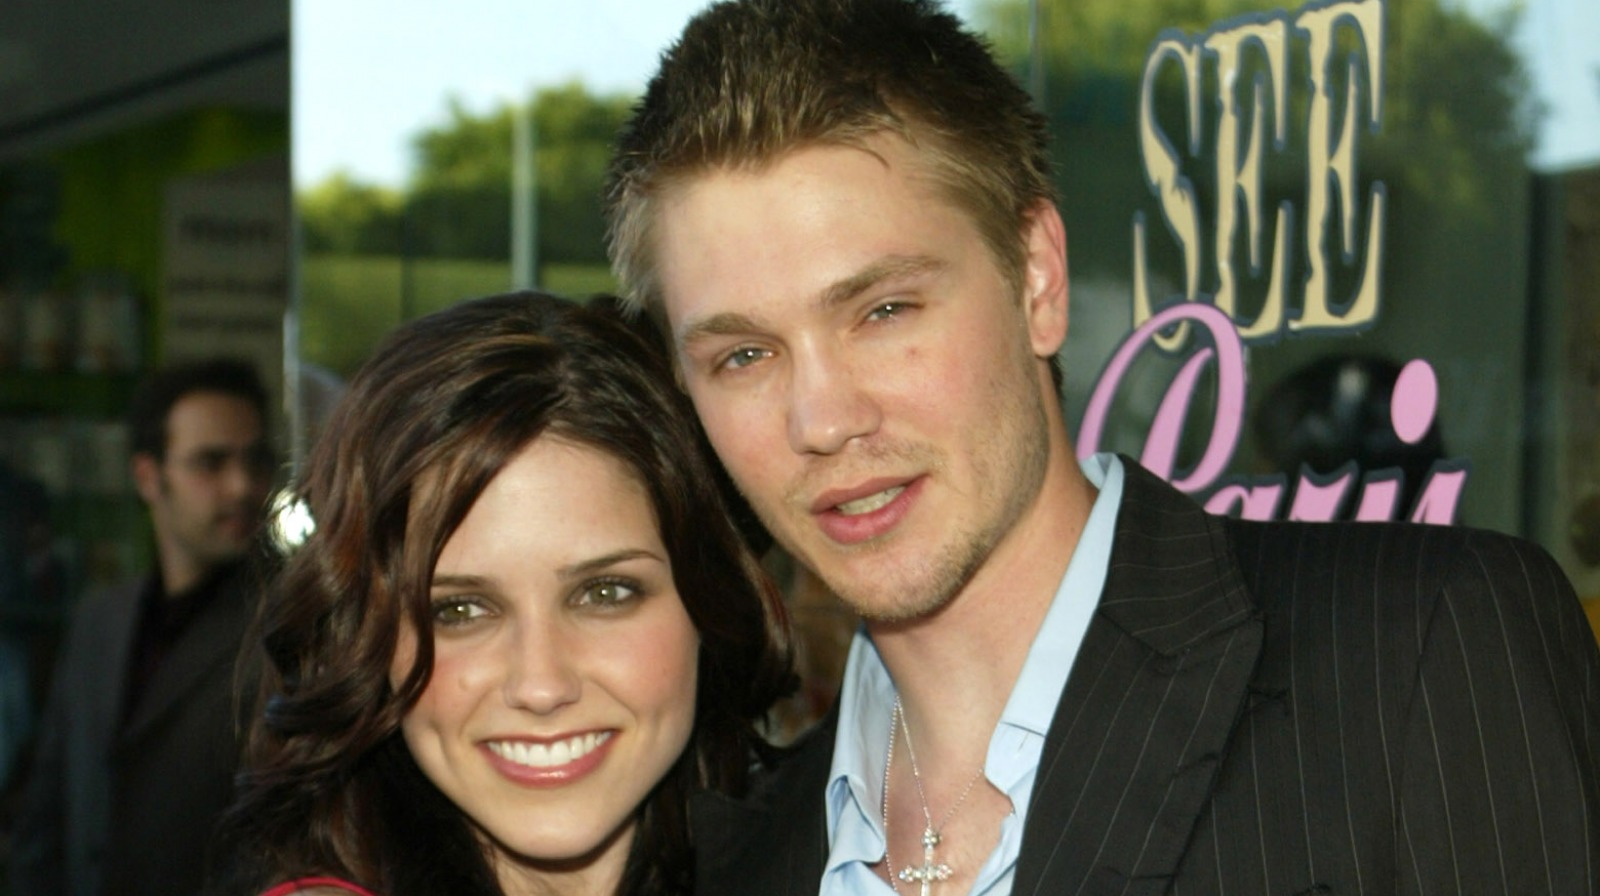 What Caused the Separation of Chad Michael Murray and Sophia Bush?